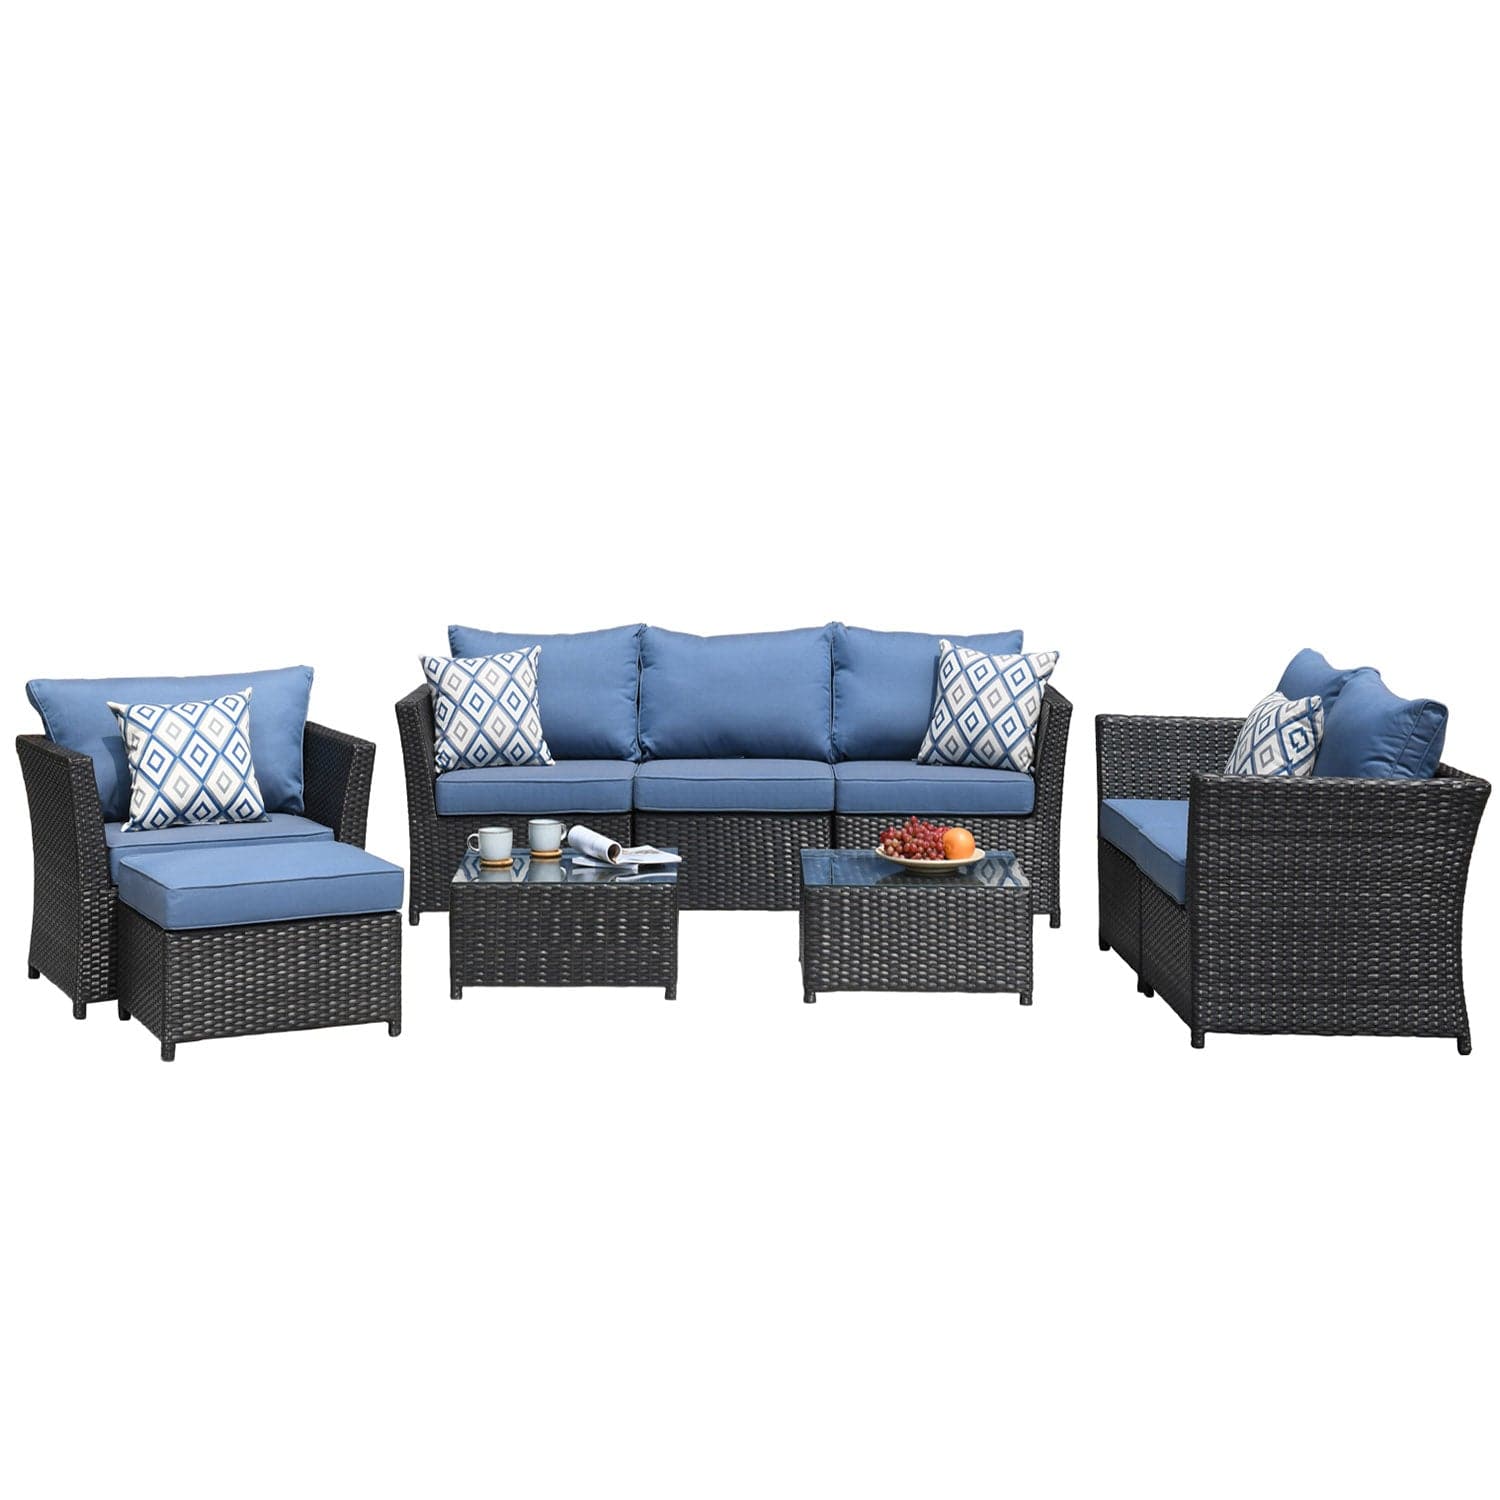 Ovios Patio Conversation Set Rimaru 9-Piece with 4 Pillows, Fully Assembled